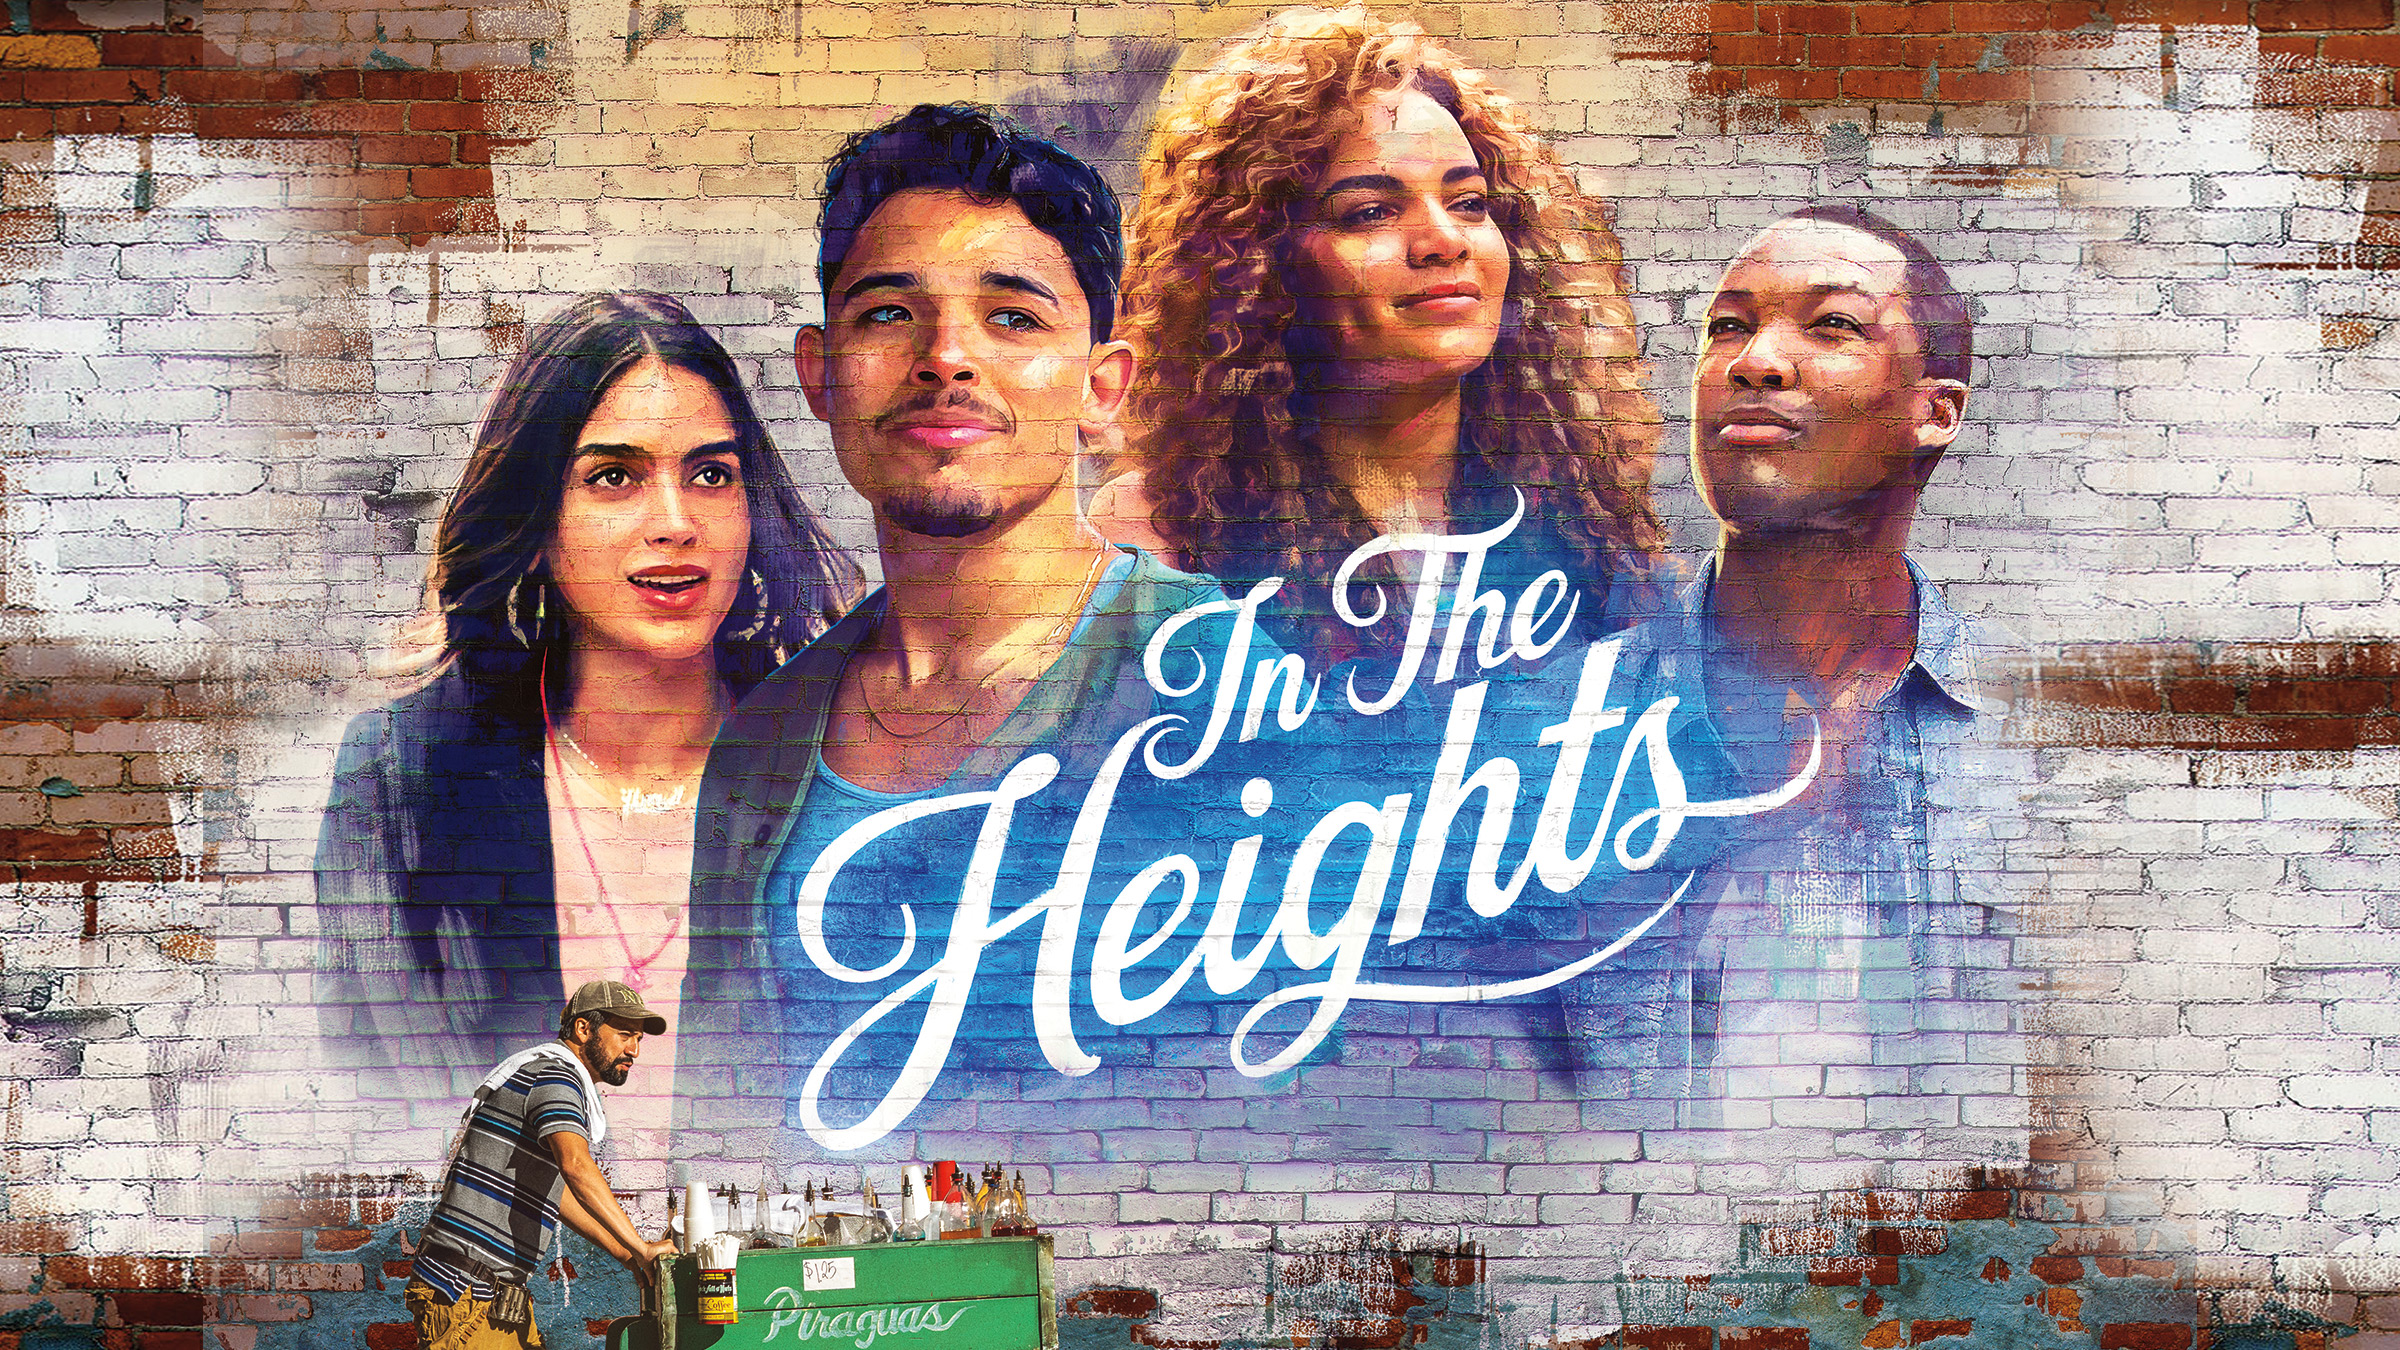 Art of the Cut: Behind the Scenes of Lin-Manuel Miranda’s “In the Heights”